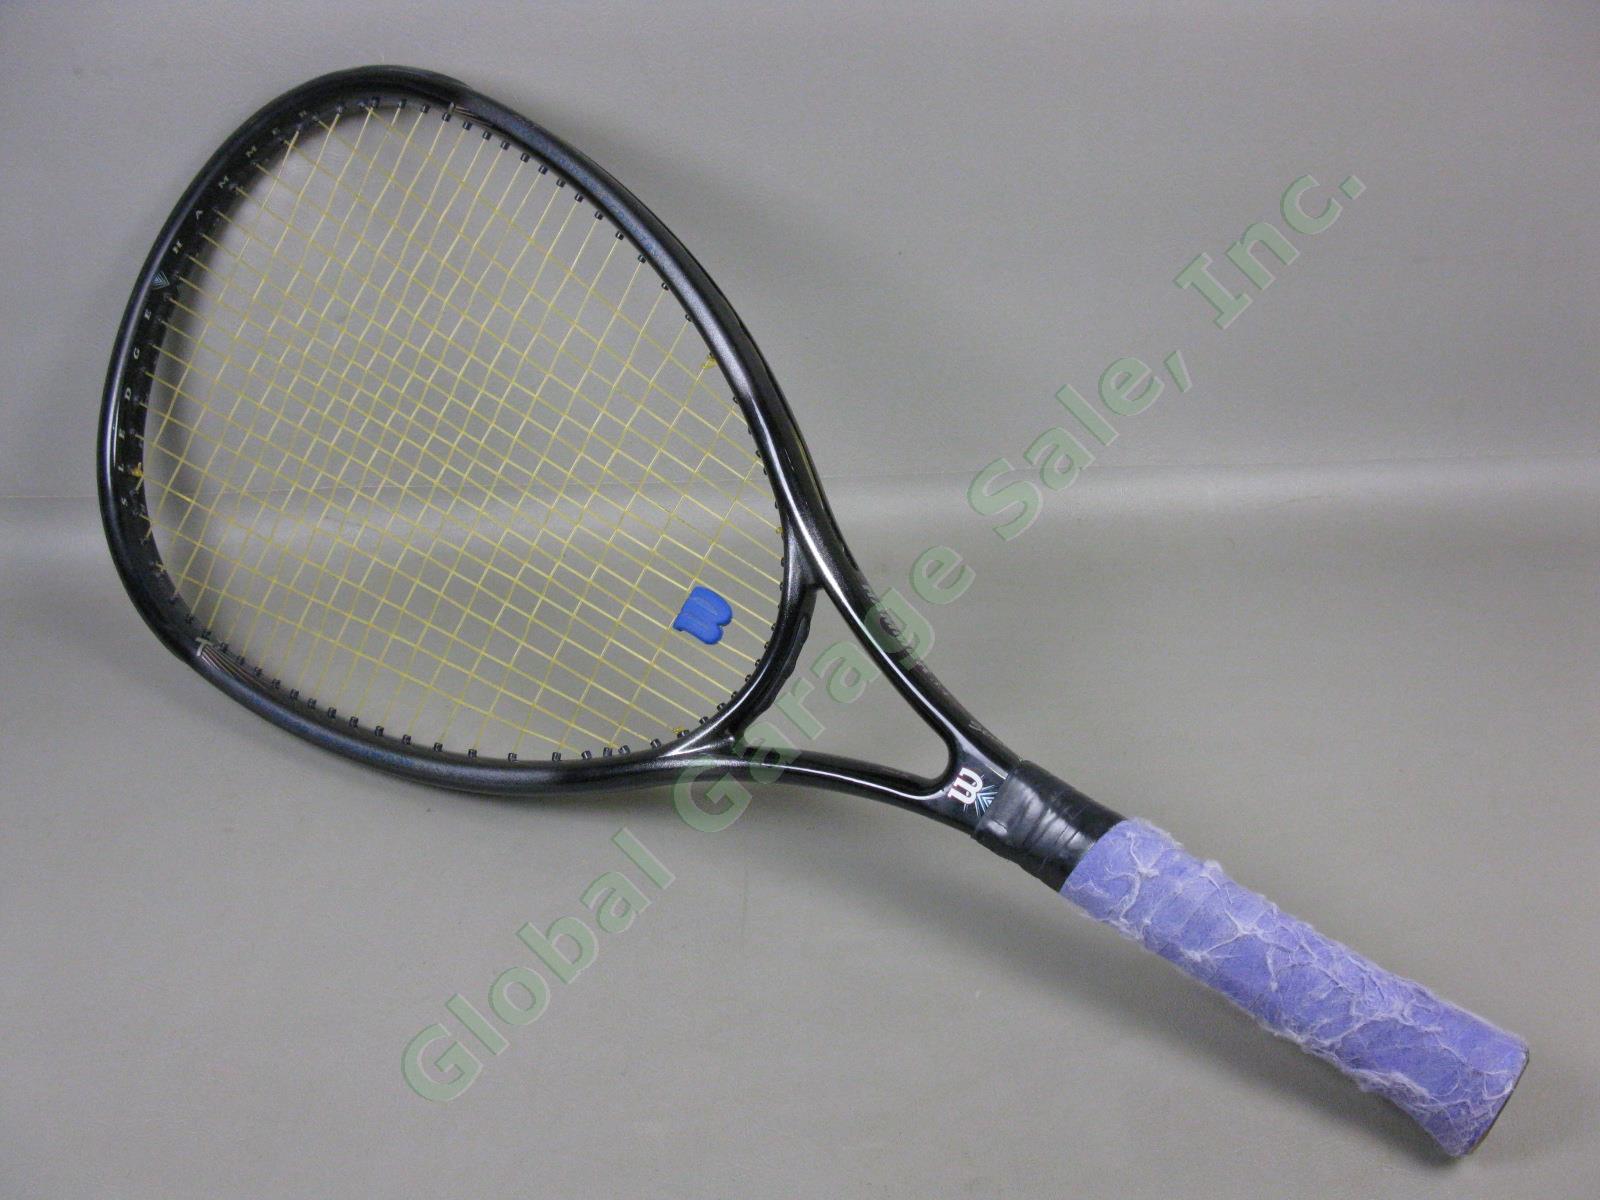 Wilson Sledge Hammer 3.4 Stretch The Limits 135 Tennis Racquet 4 5/8 Grip Used